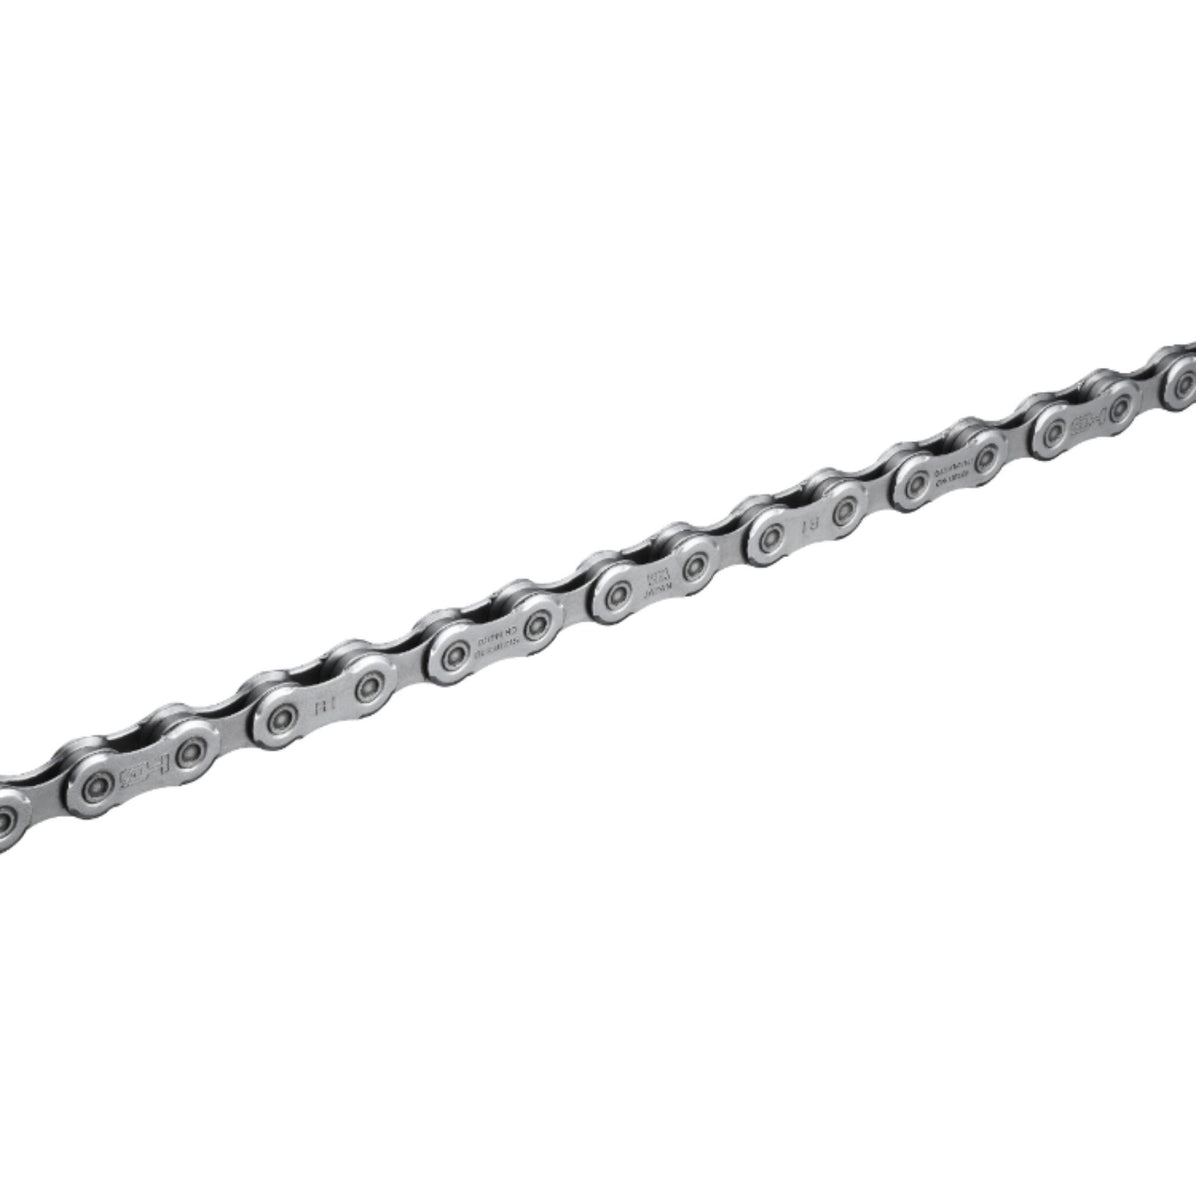 Shimano Deore CN-M6100 12-Speed Chain with Quick Link 12-Speed 138 Link